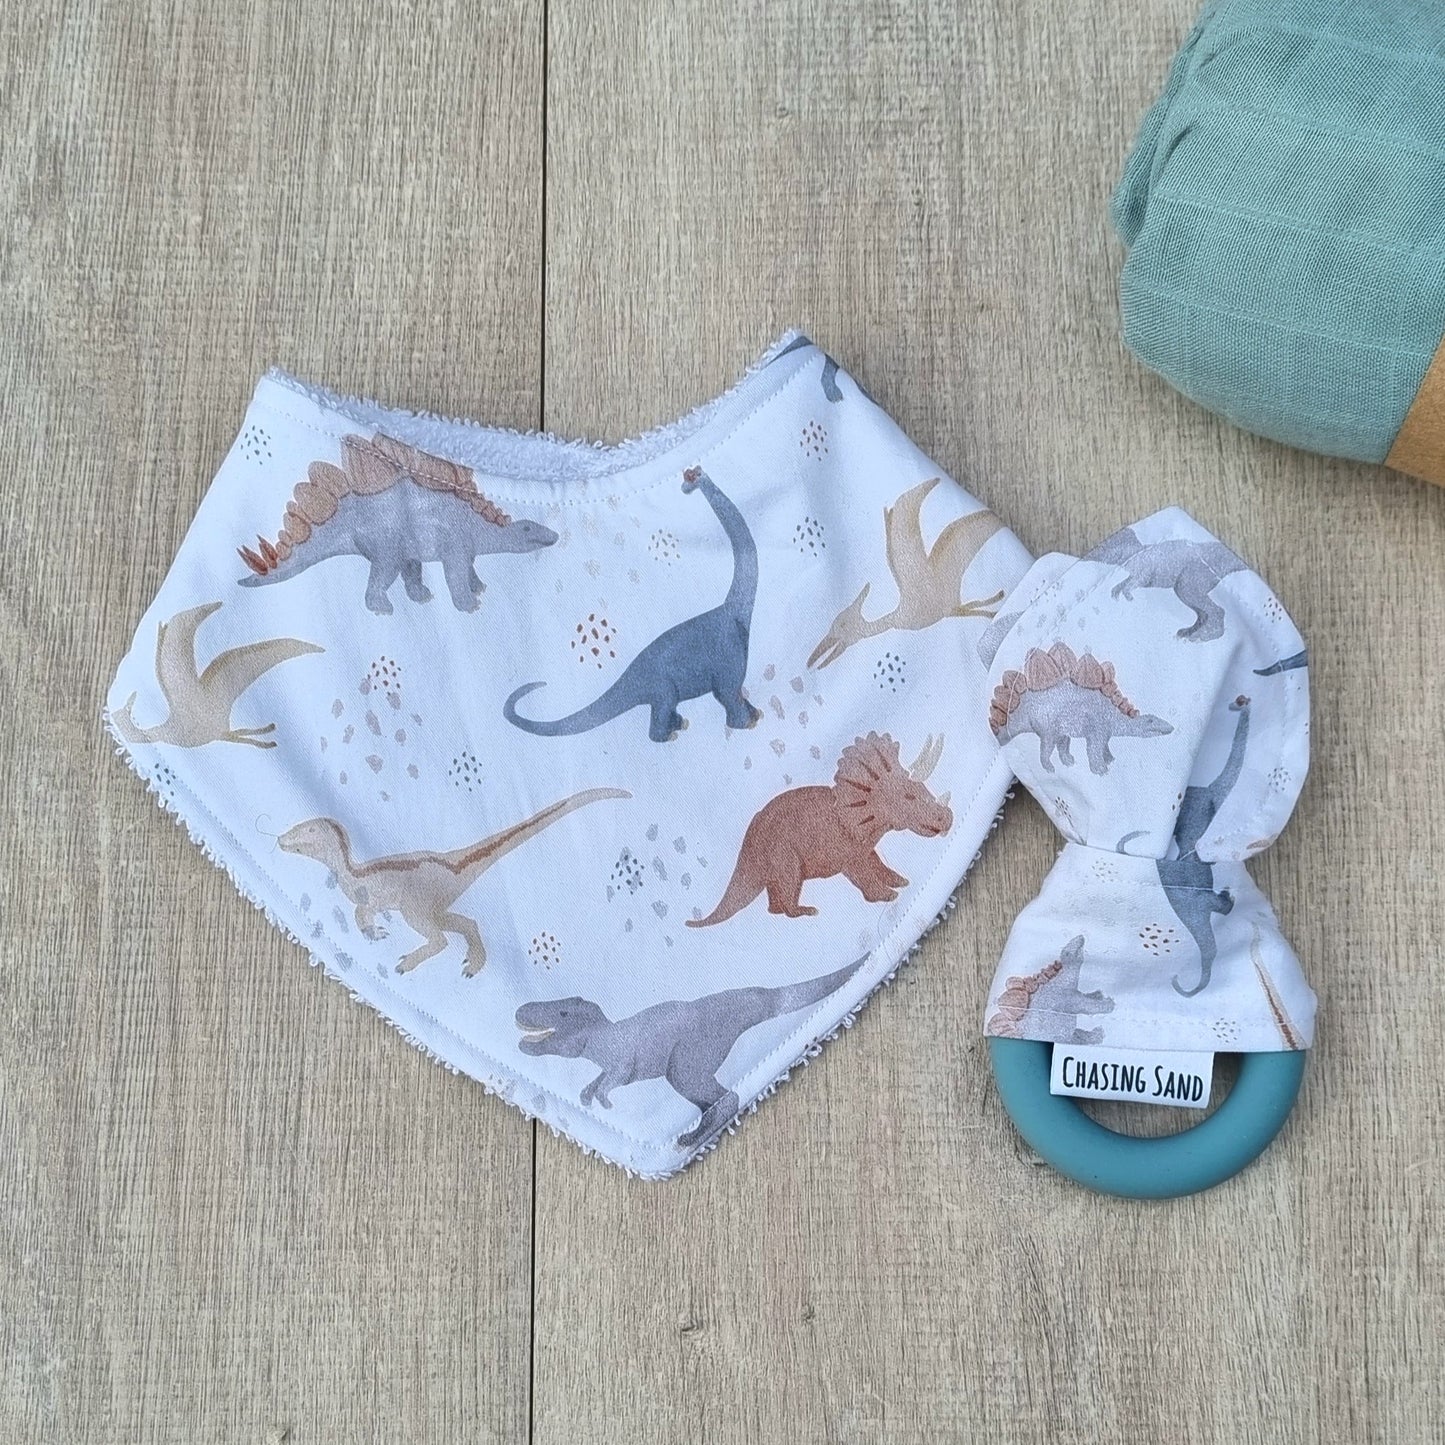 2 Piece Gift Set - Dino against wooden backdrop. Watercolour dinosaur illustrations white background. Each set contains 1x Dribble Bib and 1x Teether.